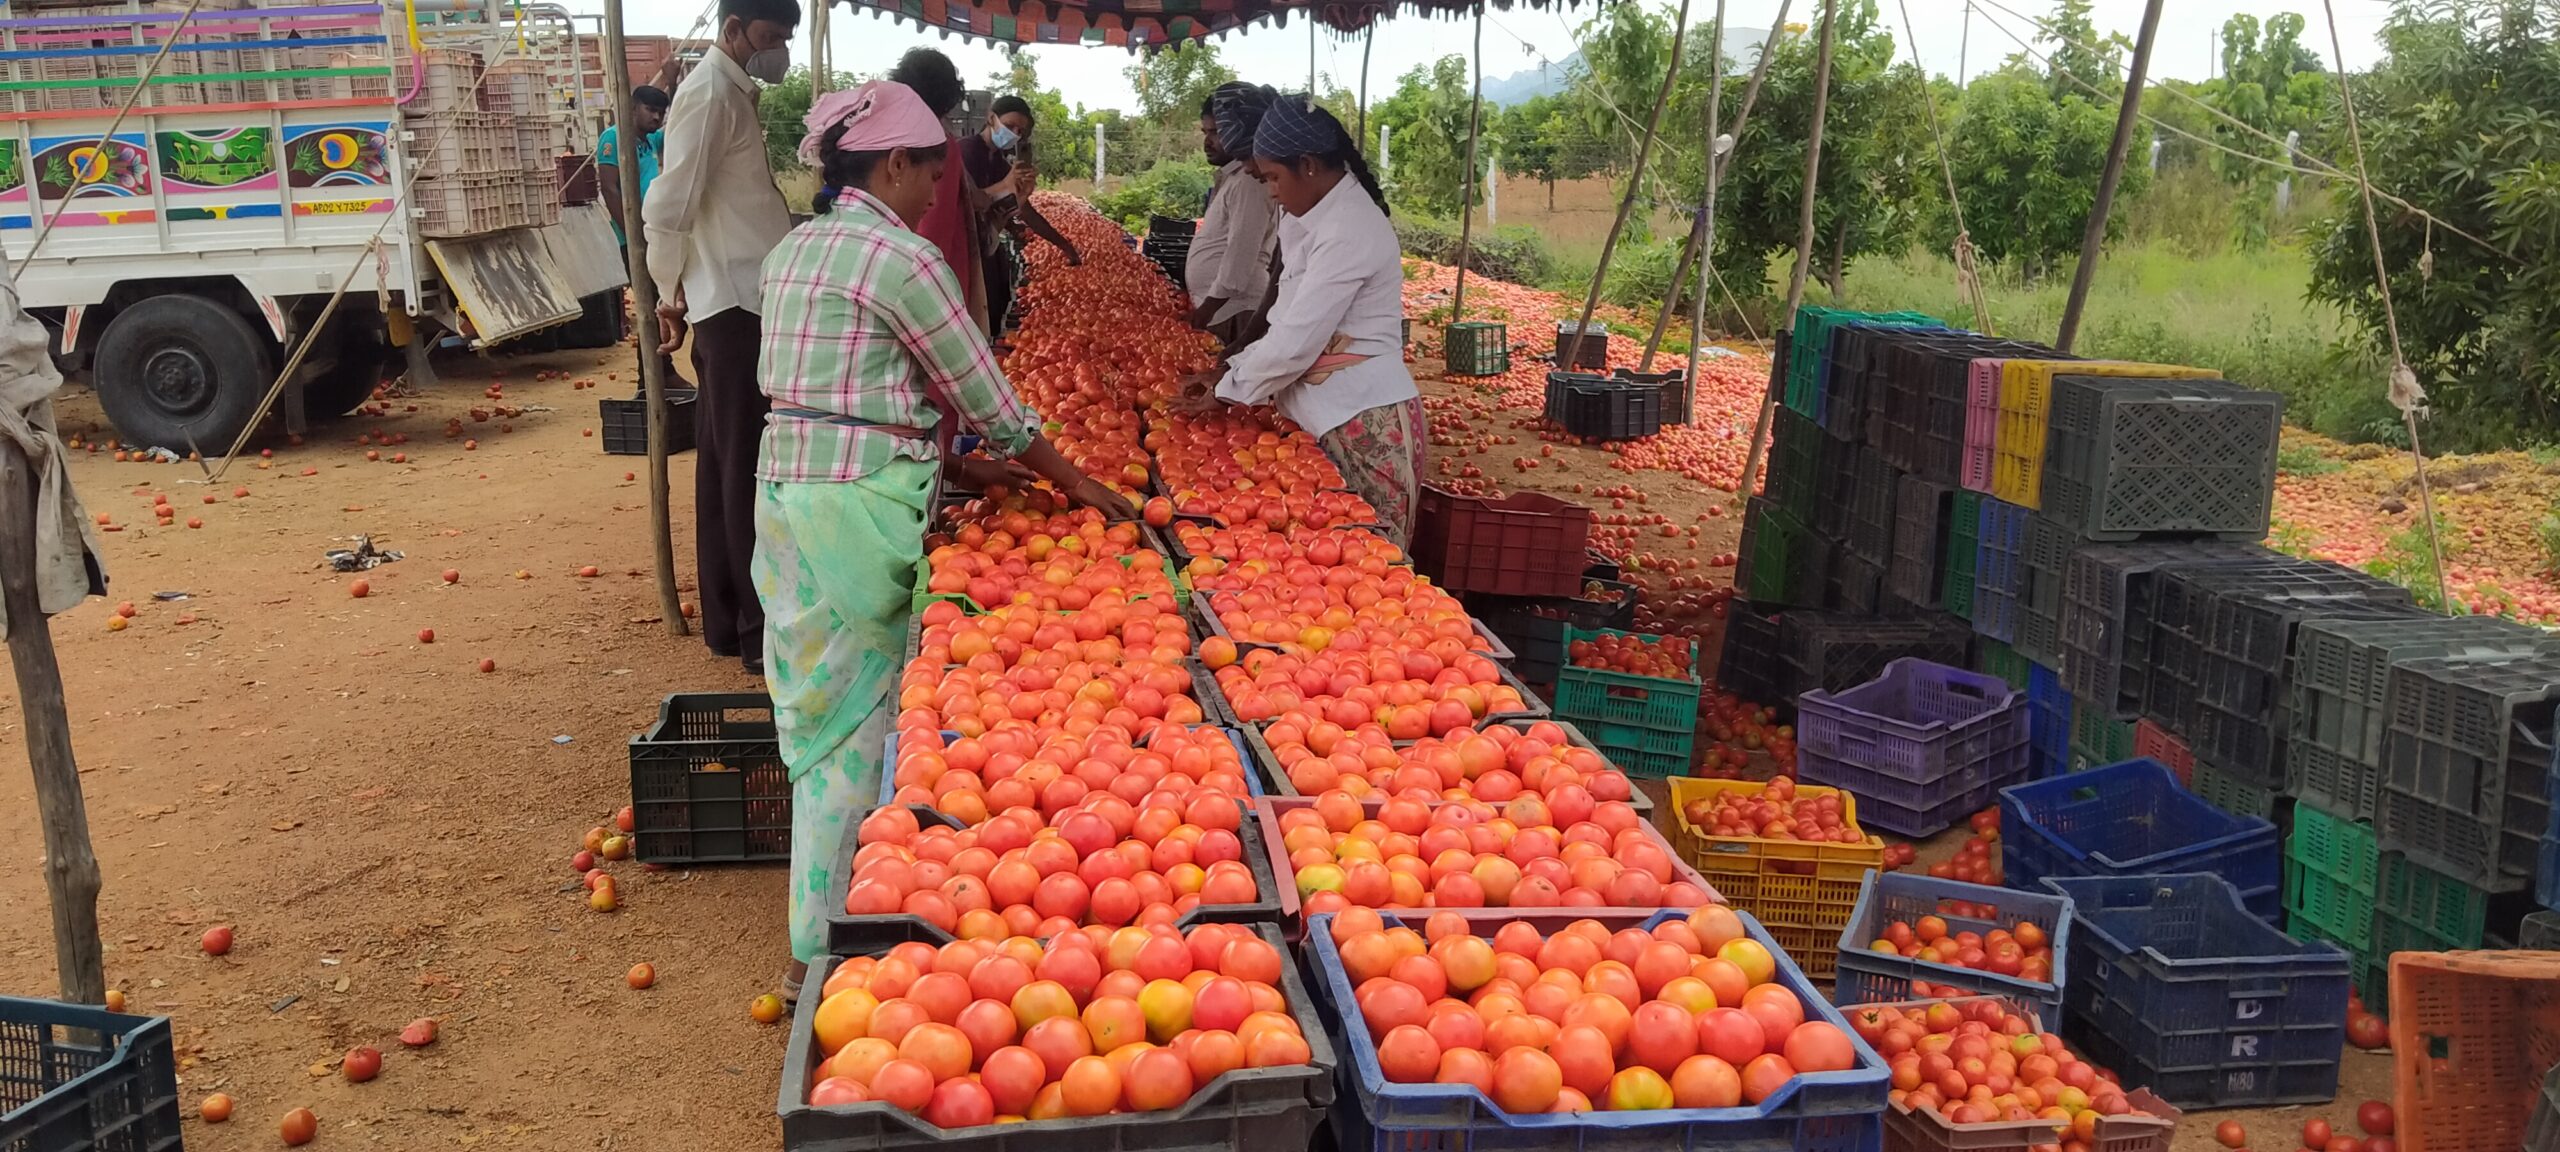 Tomatoes being sorted at an informal mandi near Anantapur, Andhra Pradesh. Middlemen conduct transactions and buy only fine grade produce, which is sent to Pondicherry, Goa and Telangana. Picture credit: Pranuti Choppakatla and Surabhi Singh